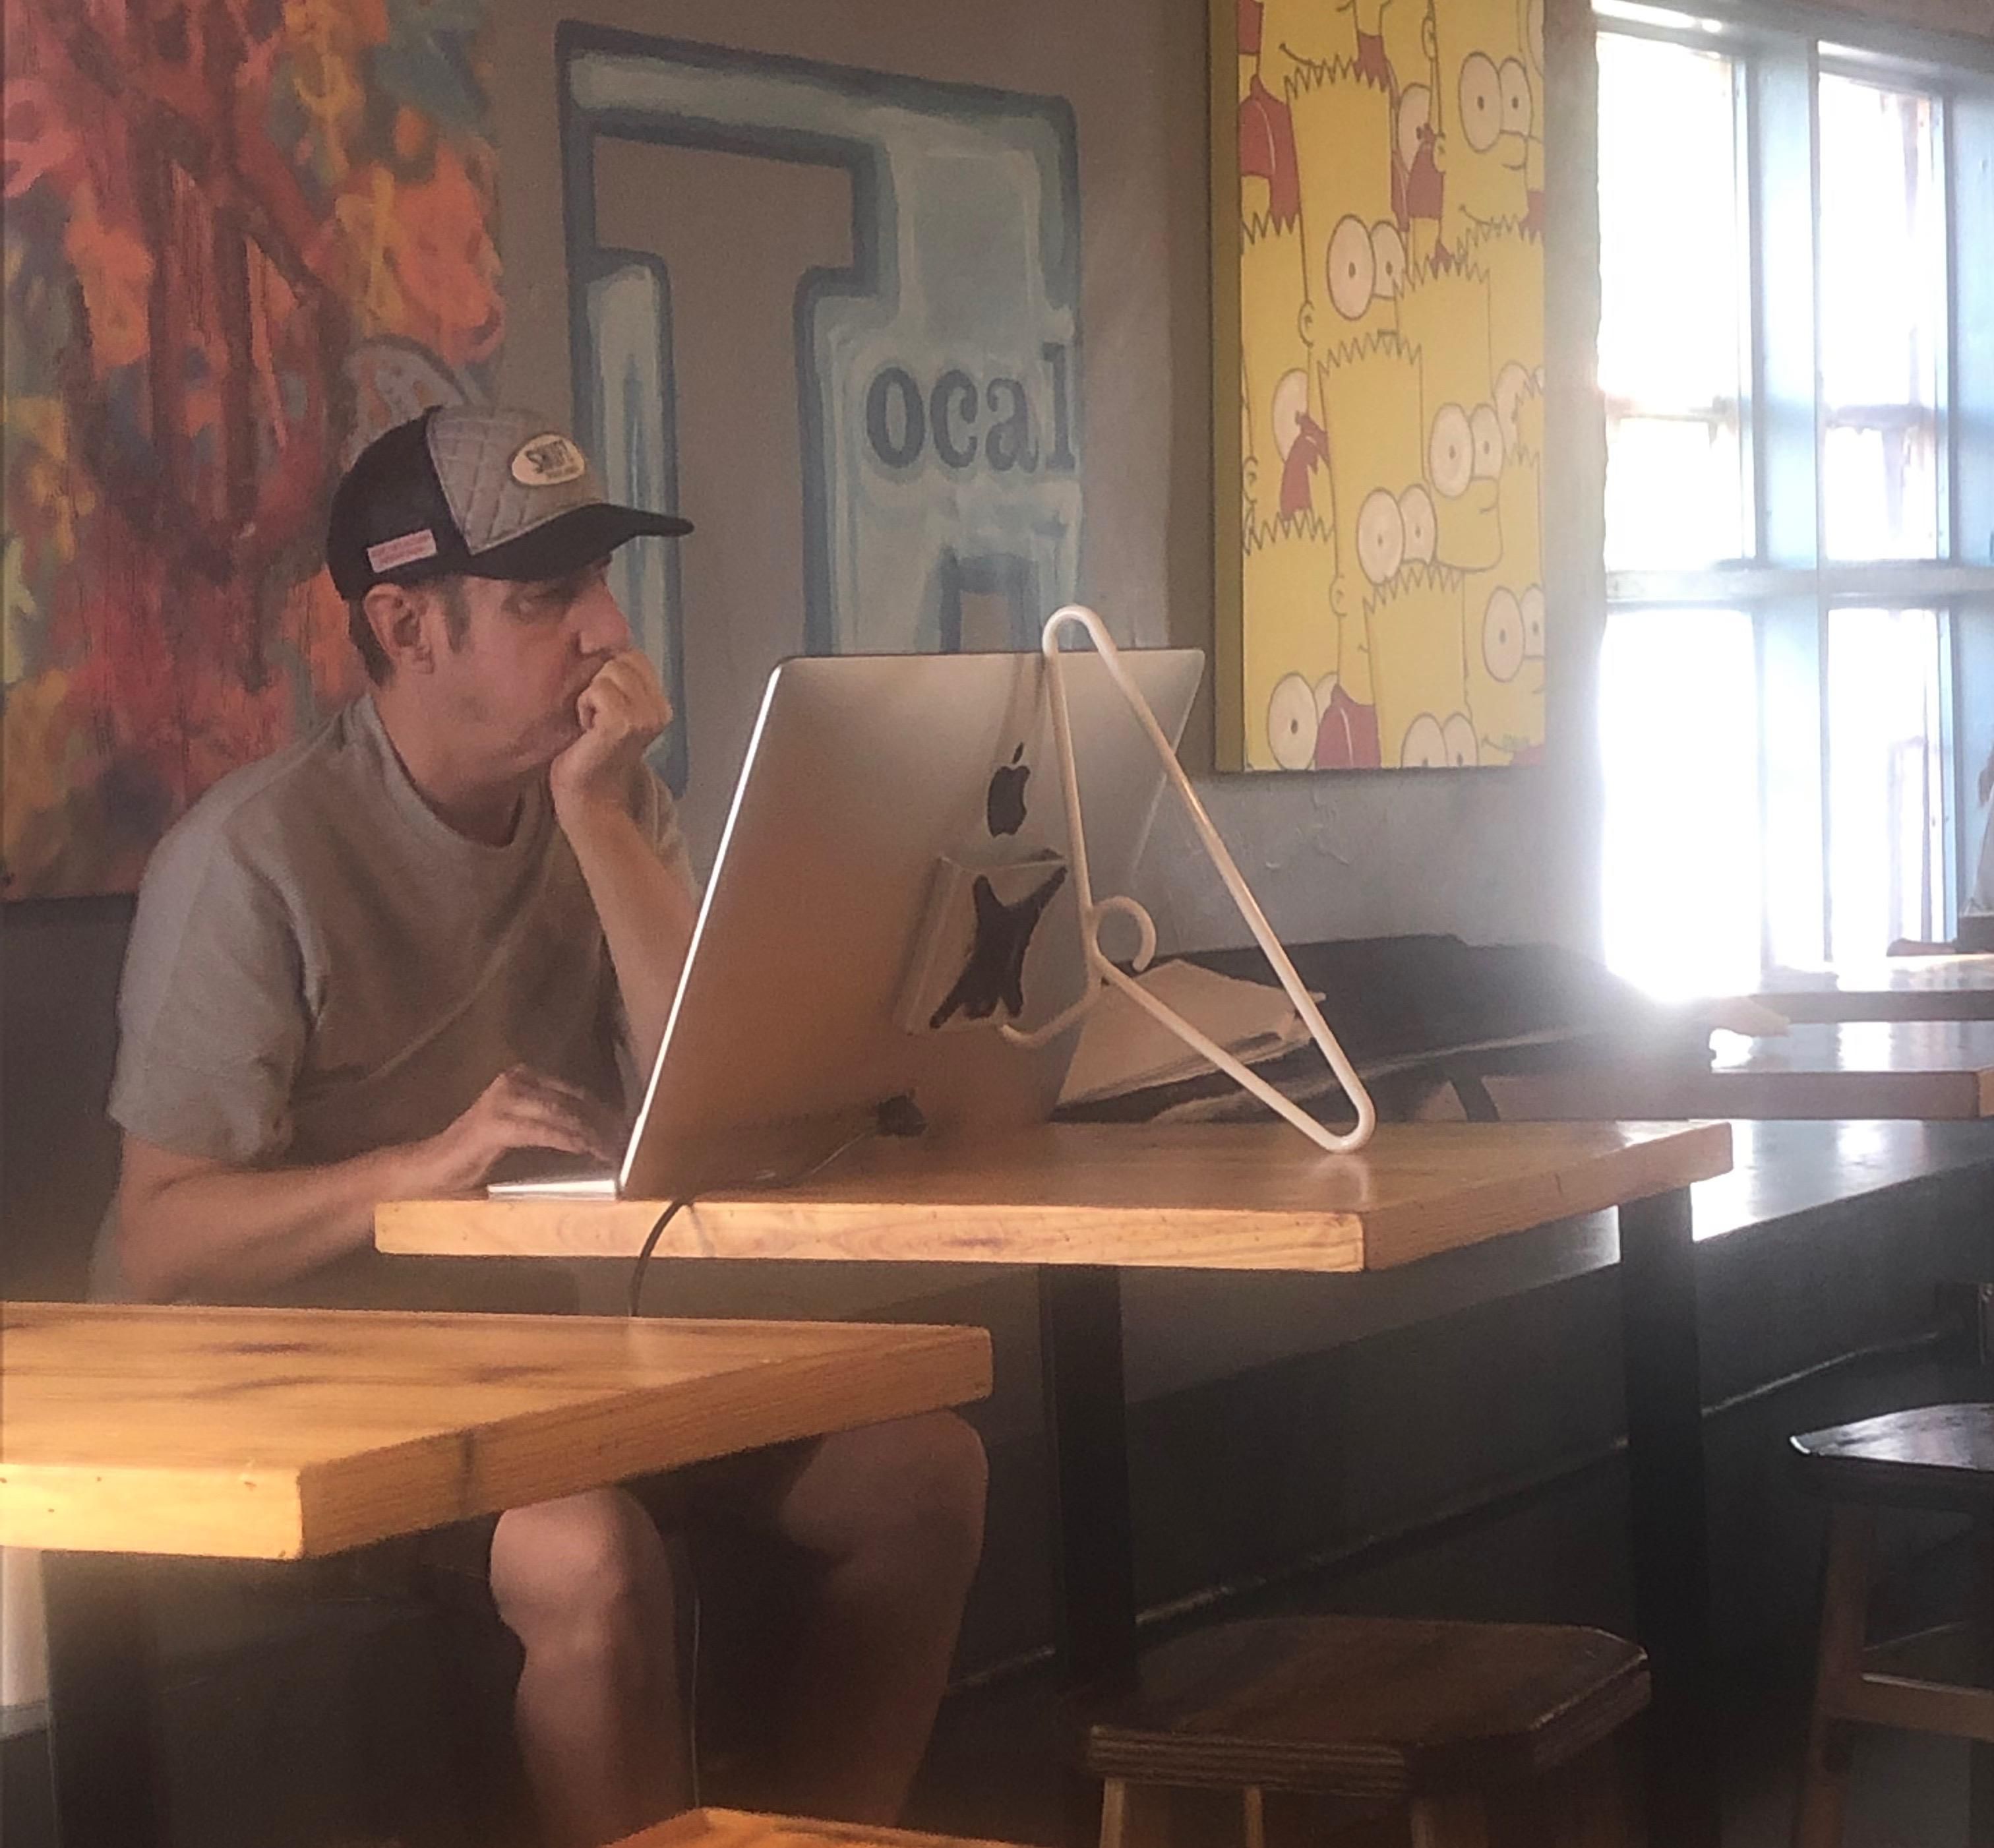 Guy at coffee shop shows off his solution to the $999 Apple stand.